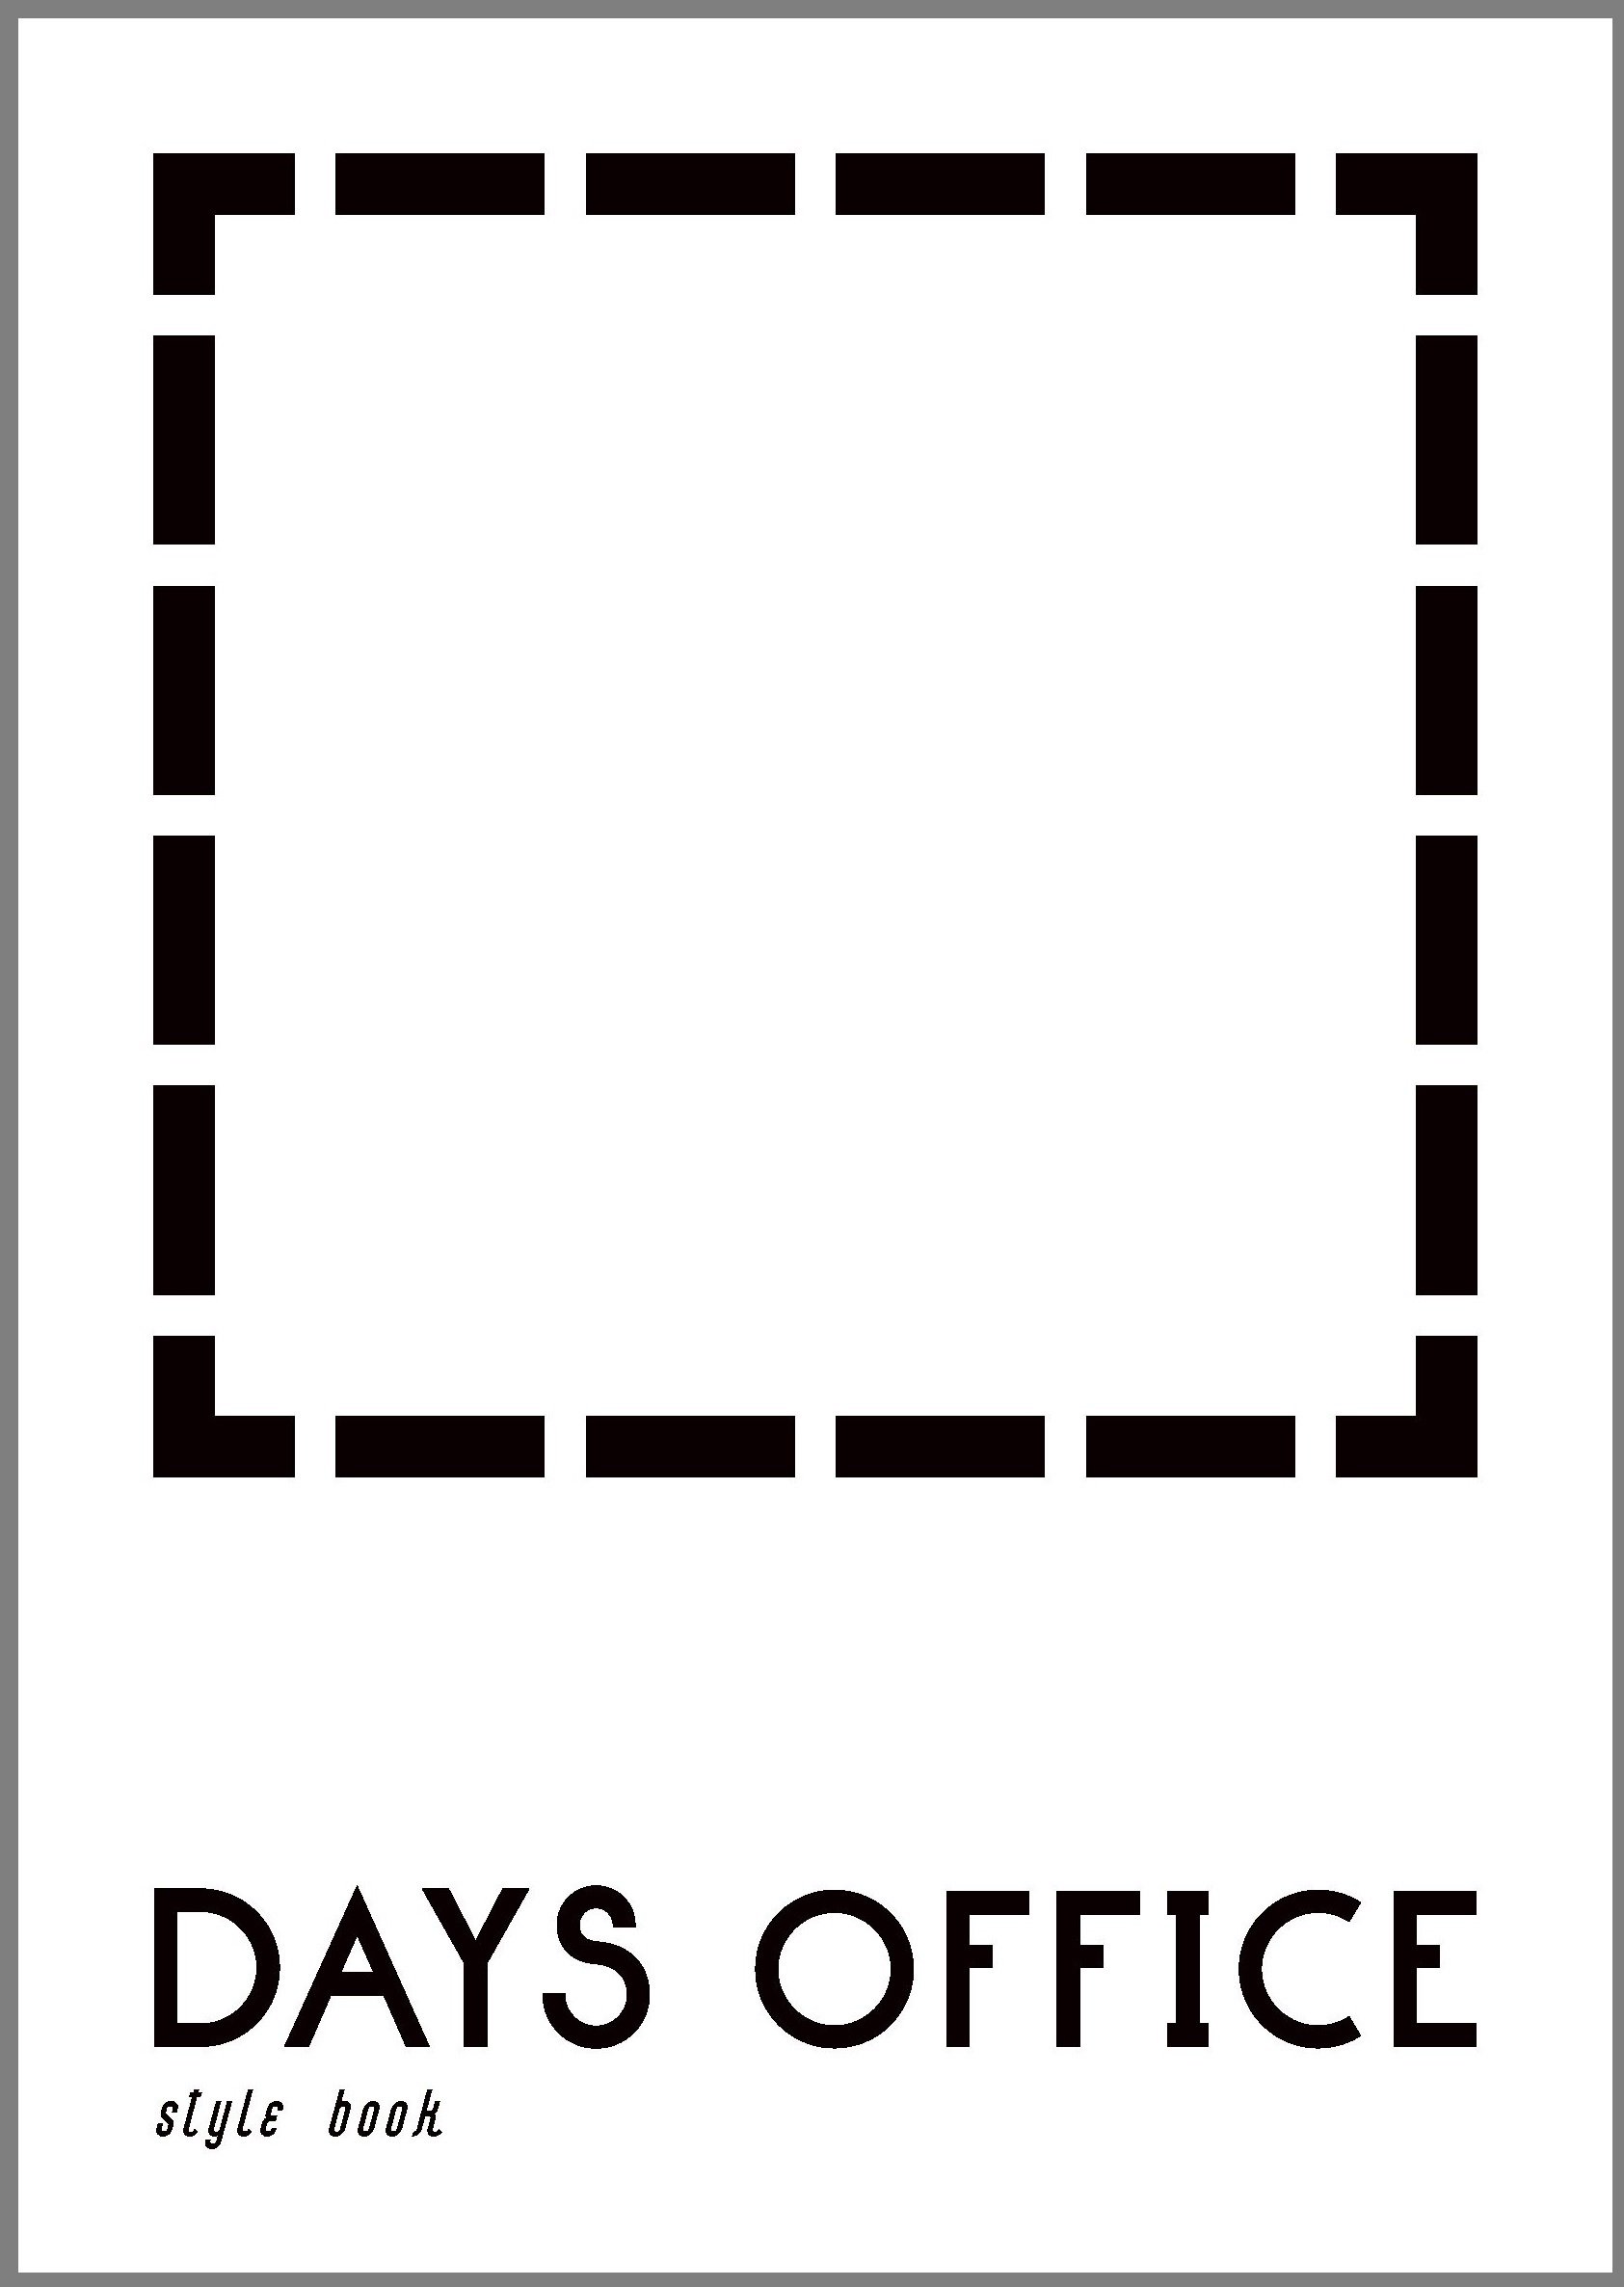 DAYS OFFICE STYLE BOOK